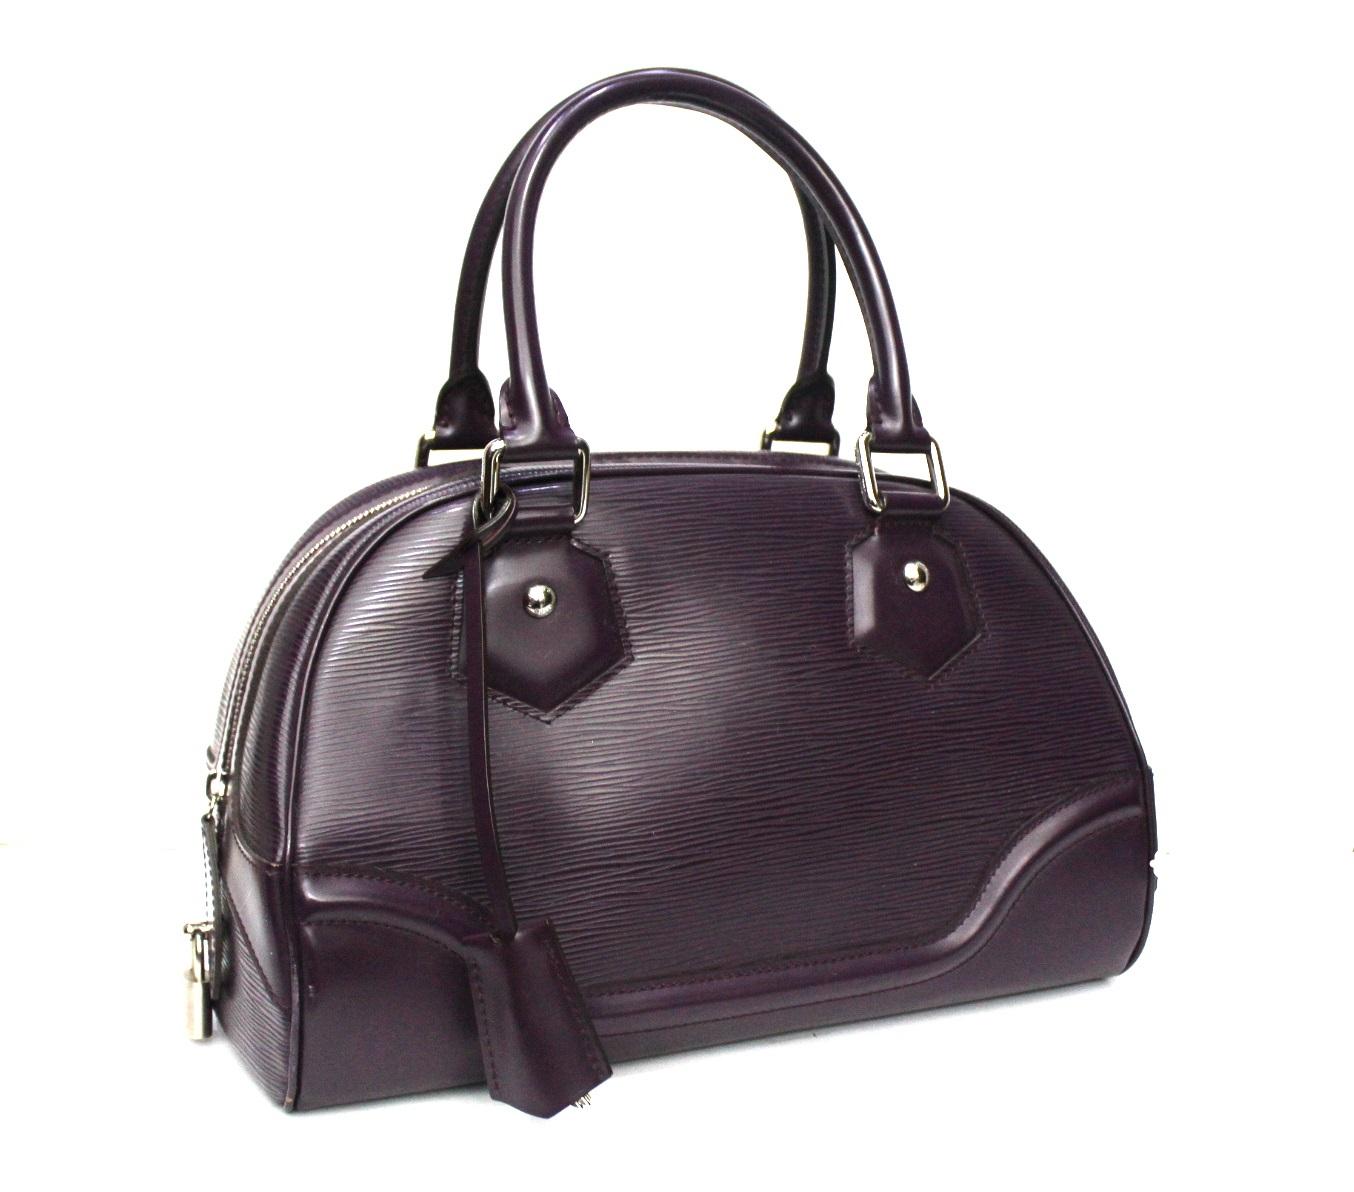 Louis Vuitton Bowling Montaigne bag in purple Epi cloth. Equipped with double leather handle with silver hardware. Zip closure, large enough inside. The bag is in excellent condition. YEAR 2007.